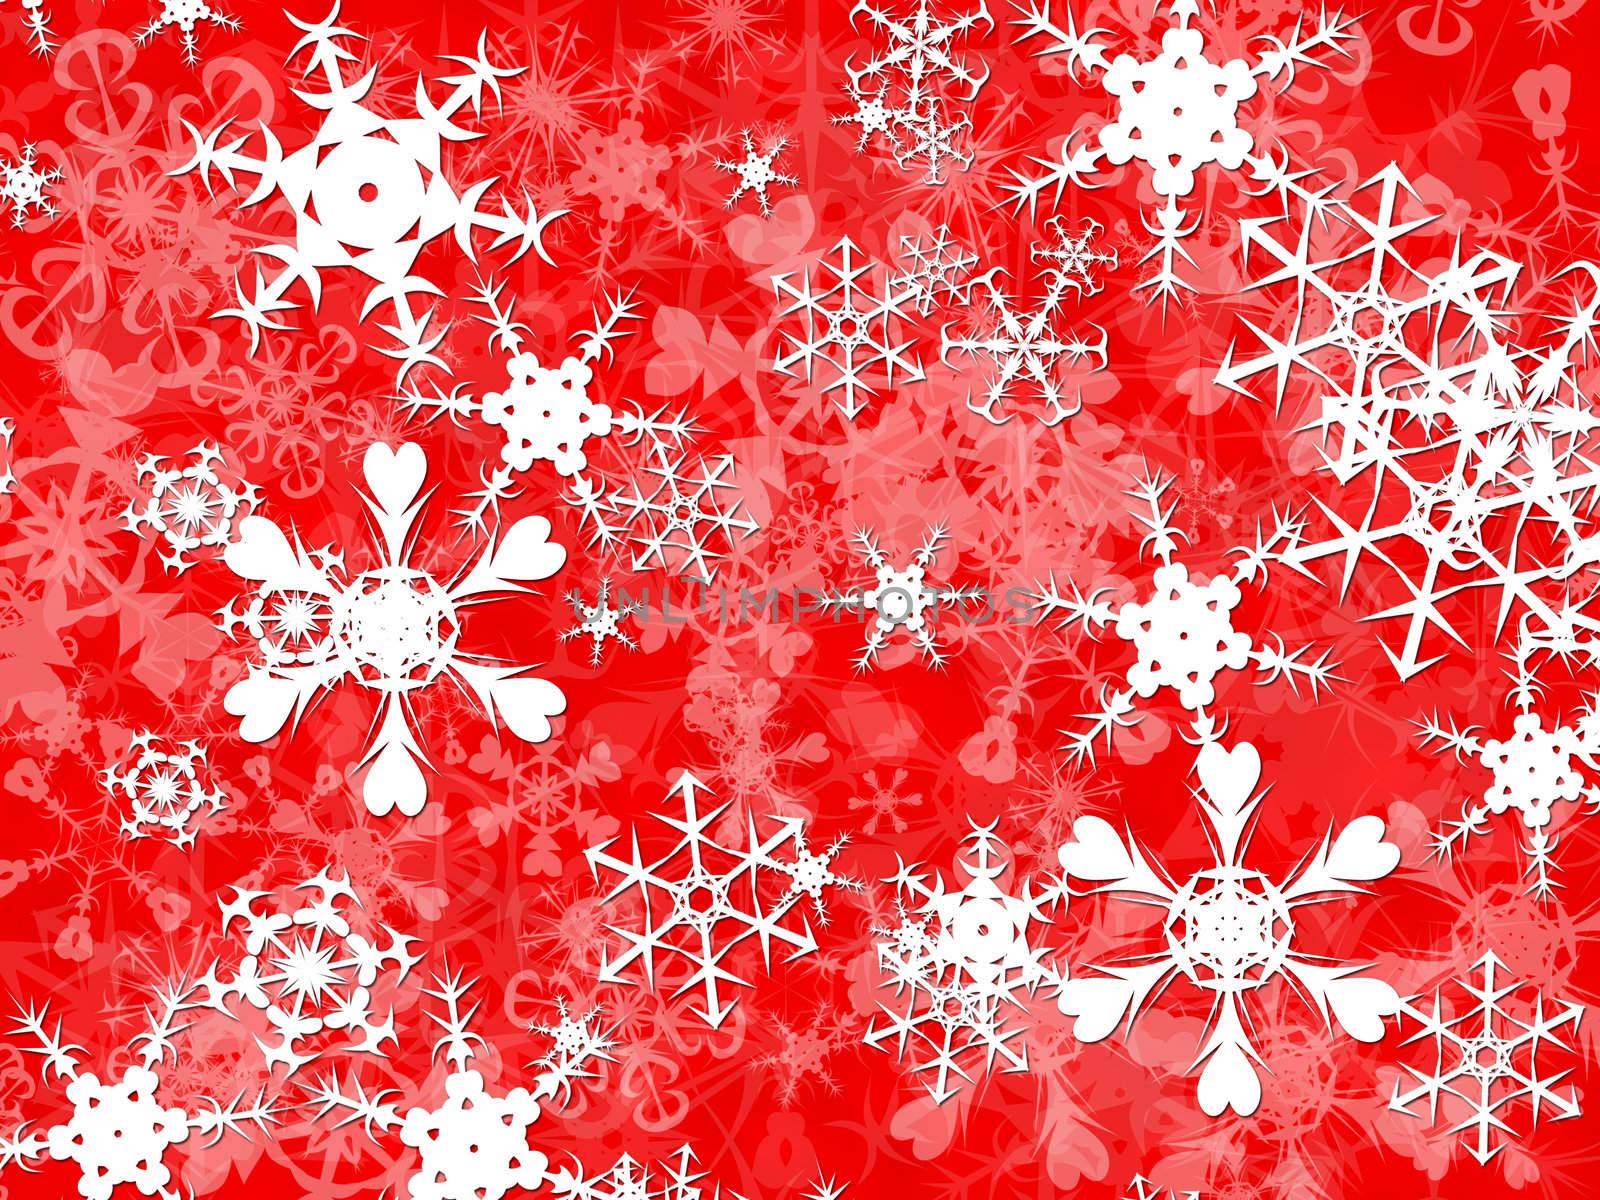 Bright White christmas snowflakes on a red background design by bobbigmac